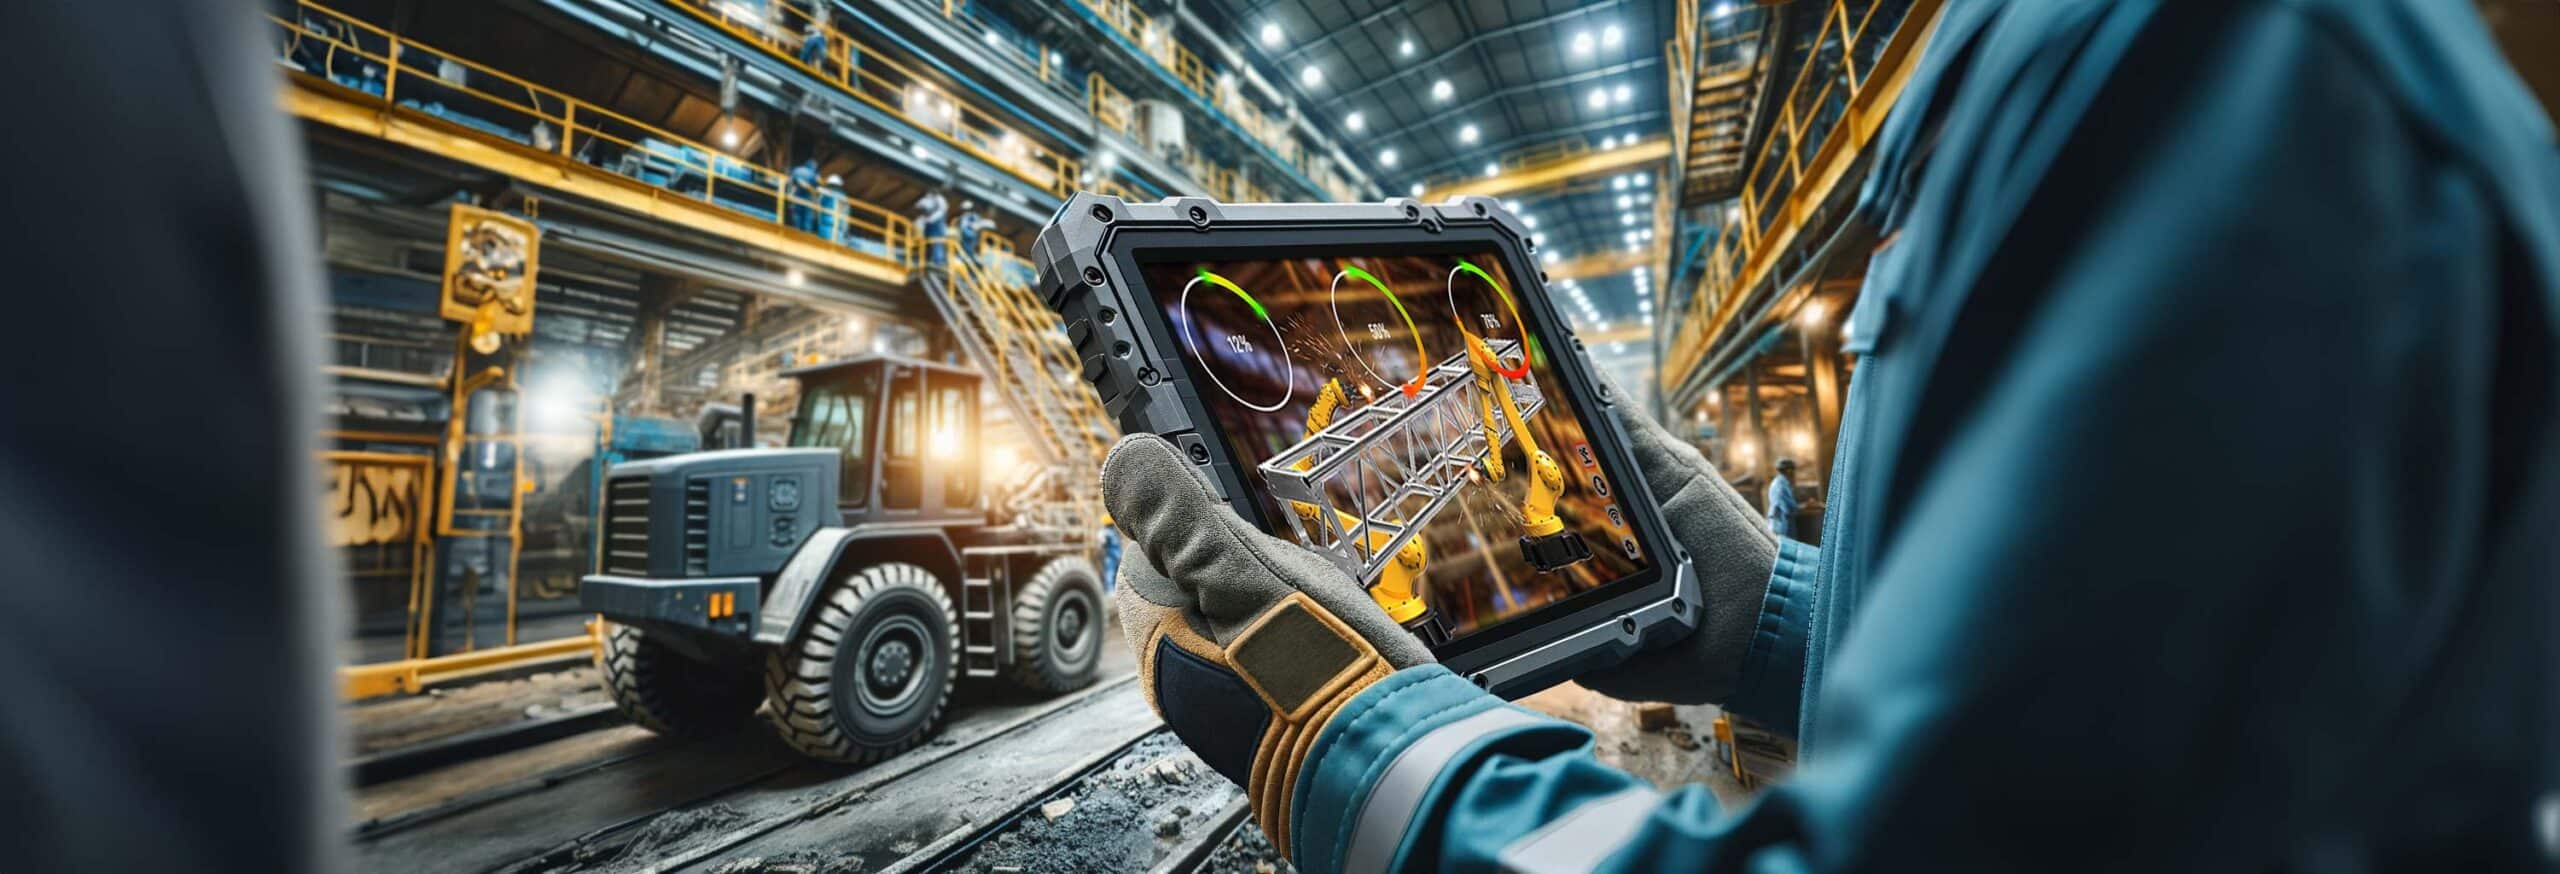 Rugged Tablets in an industrial environment